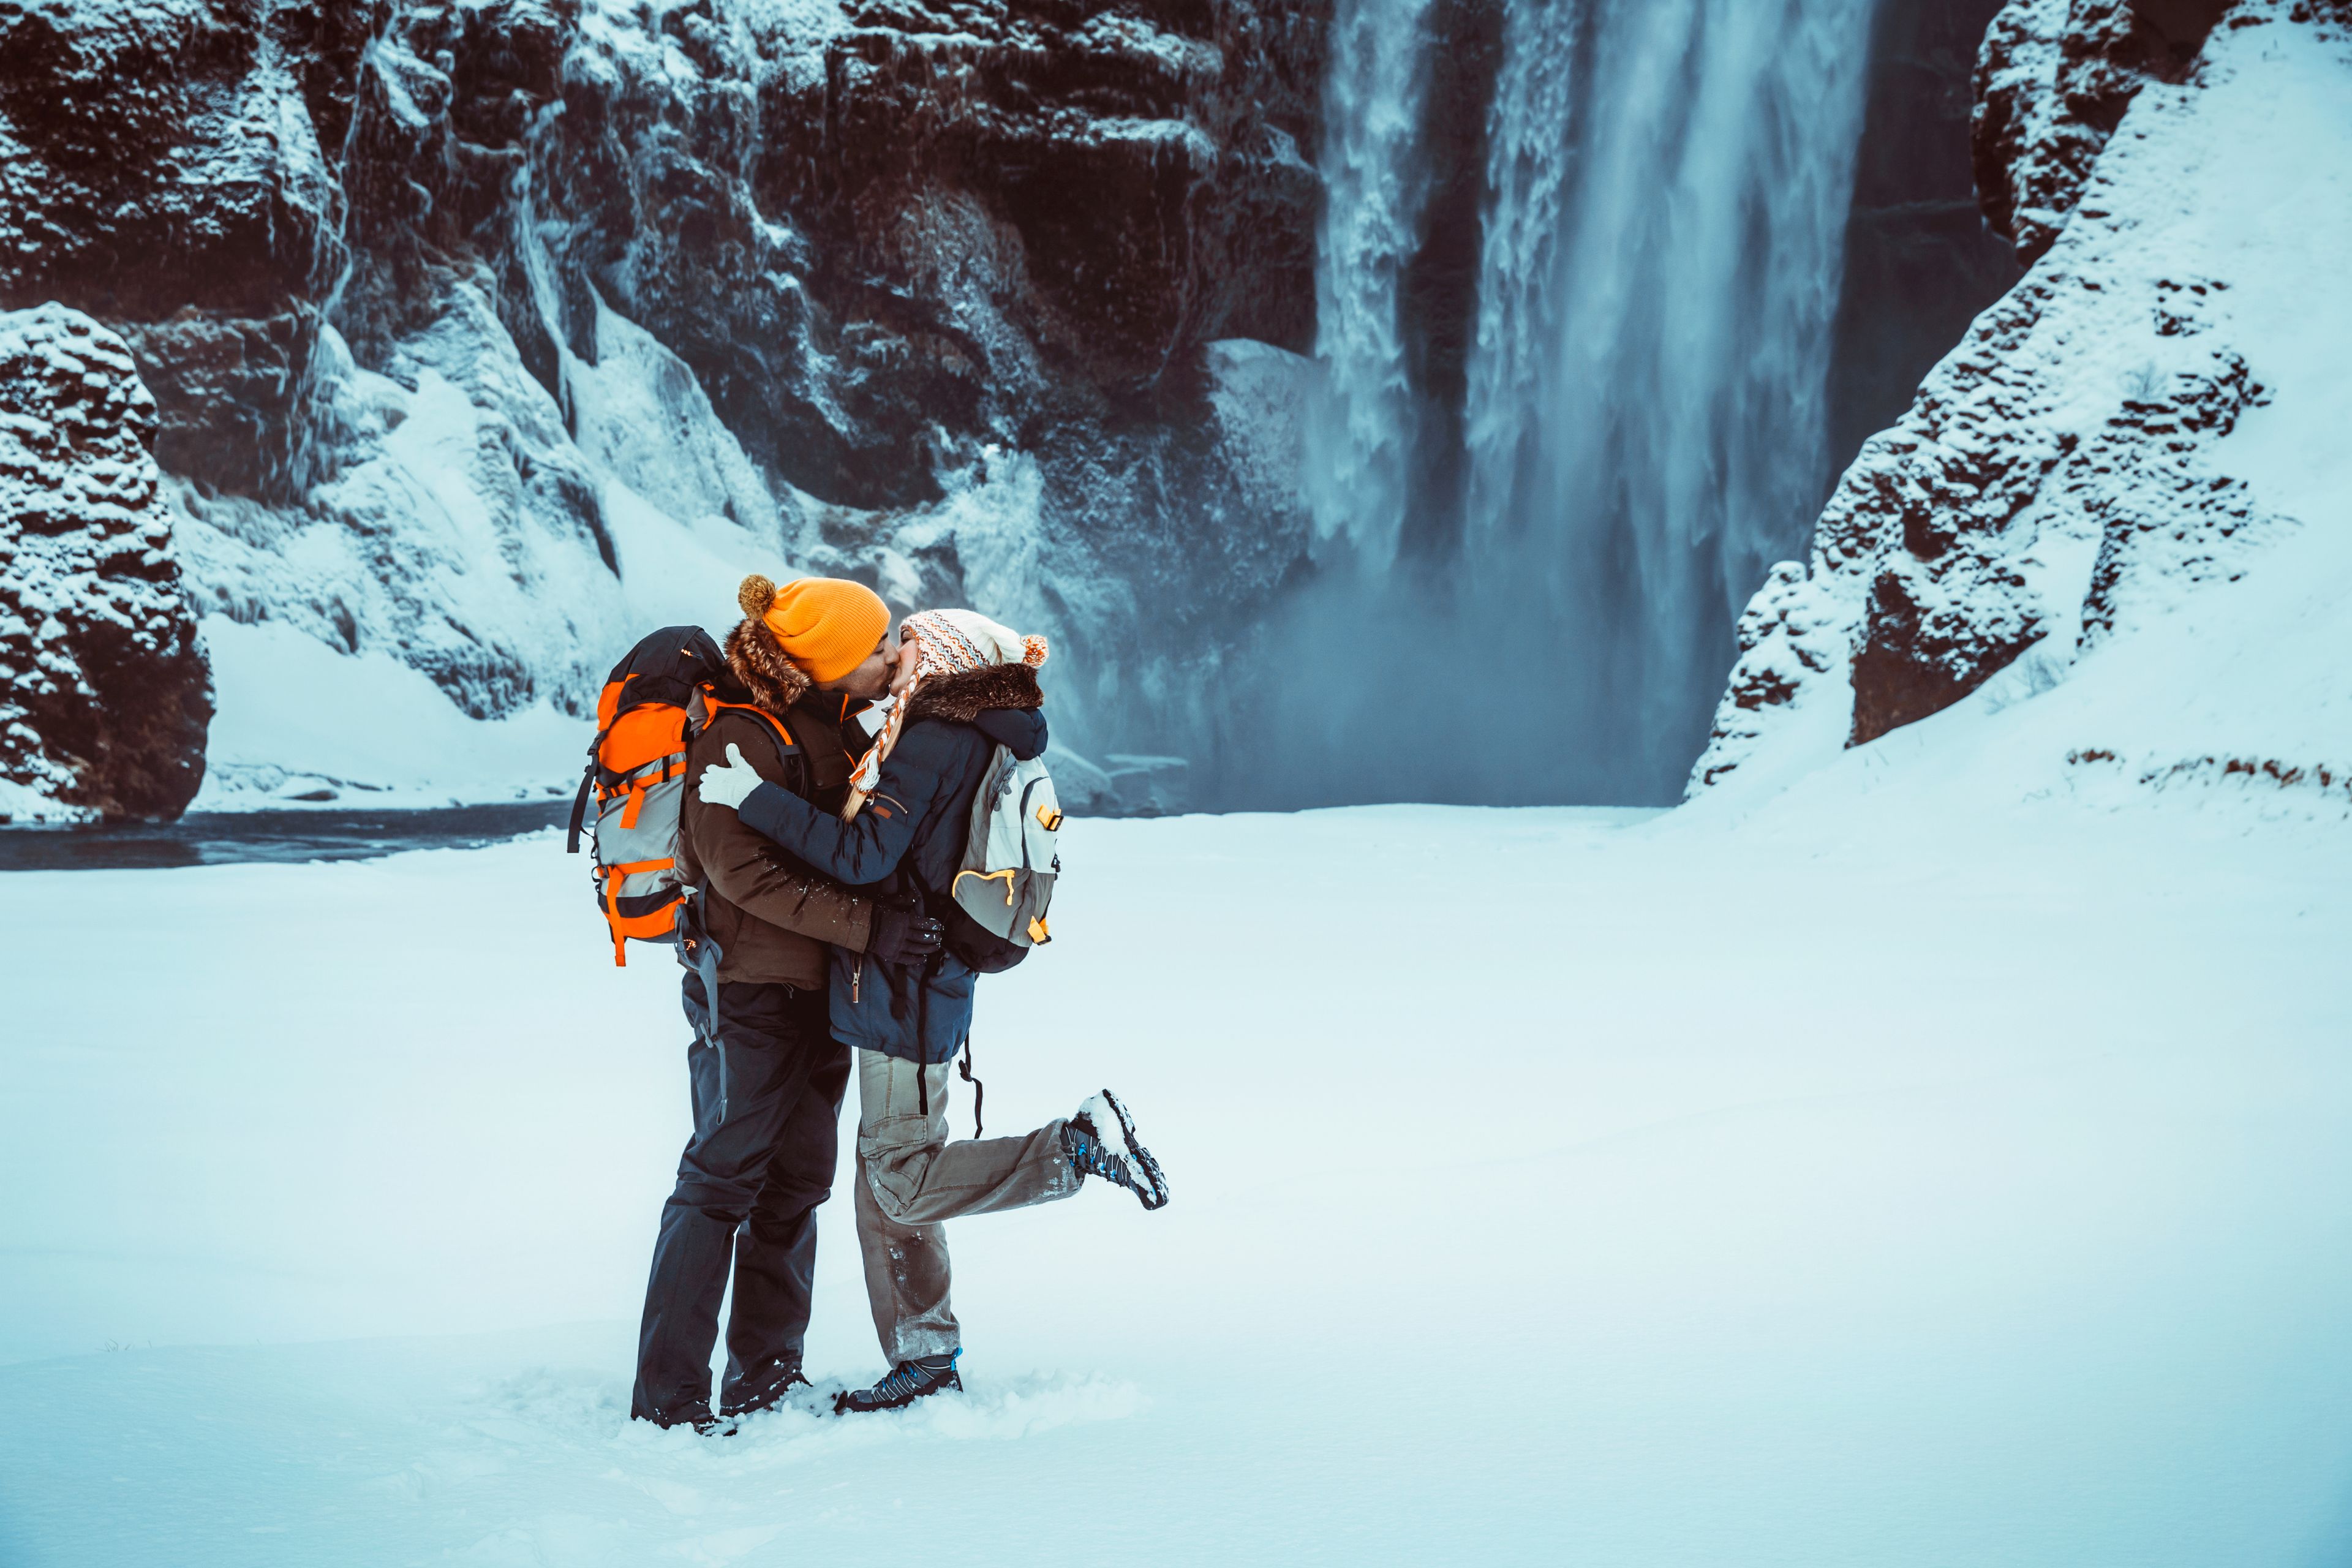 Honeymoon winter vacation with a waterfall behind